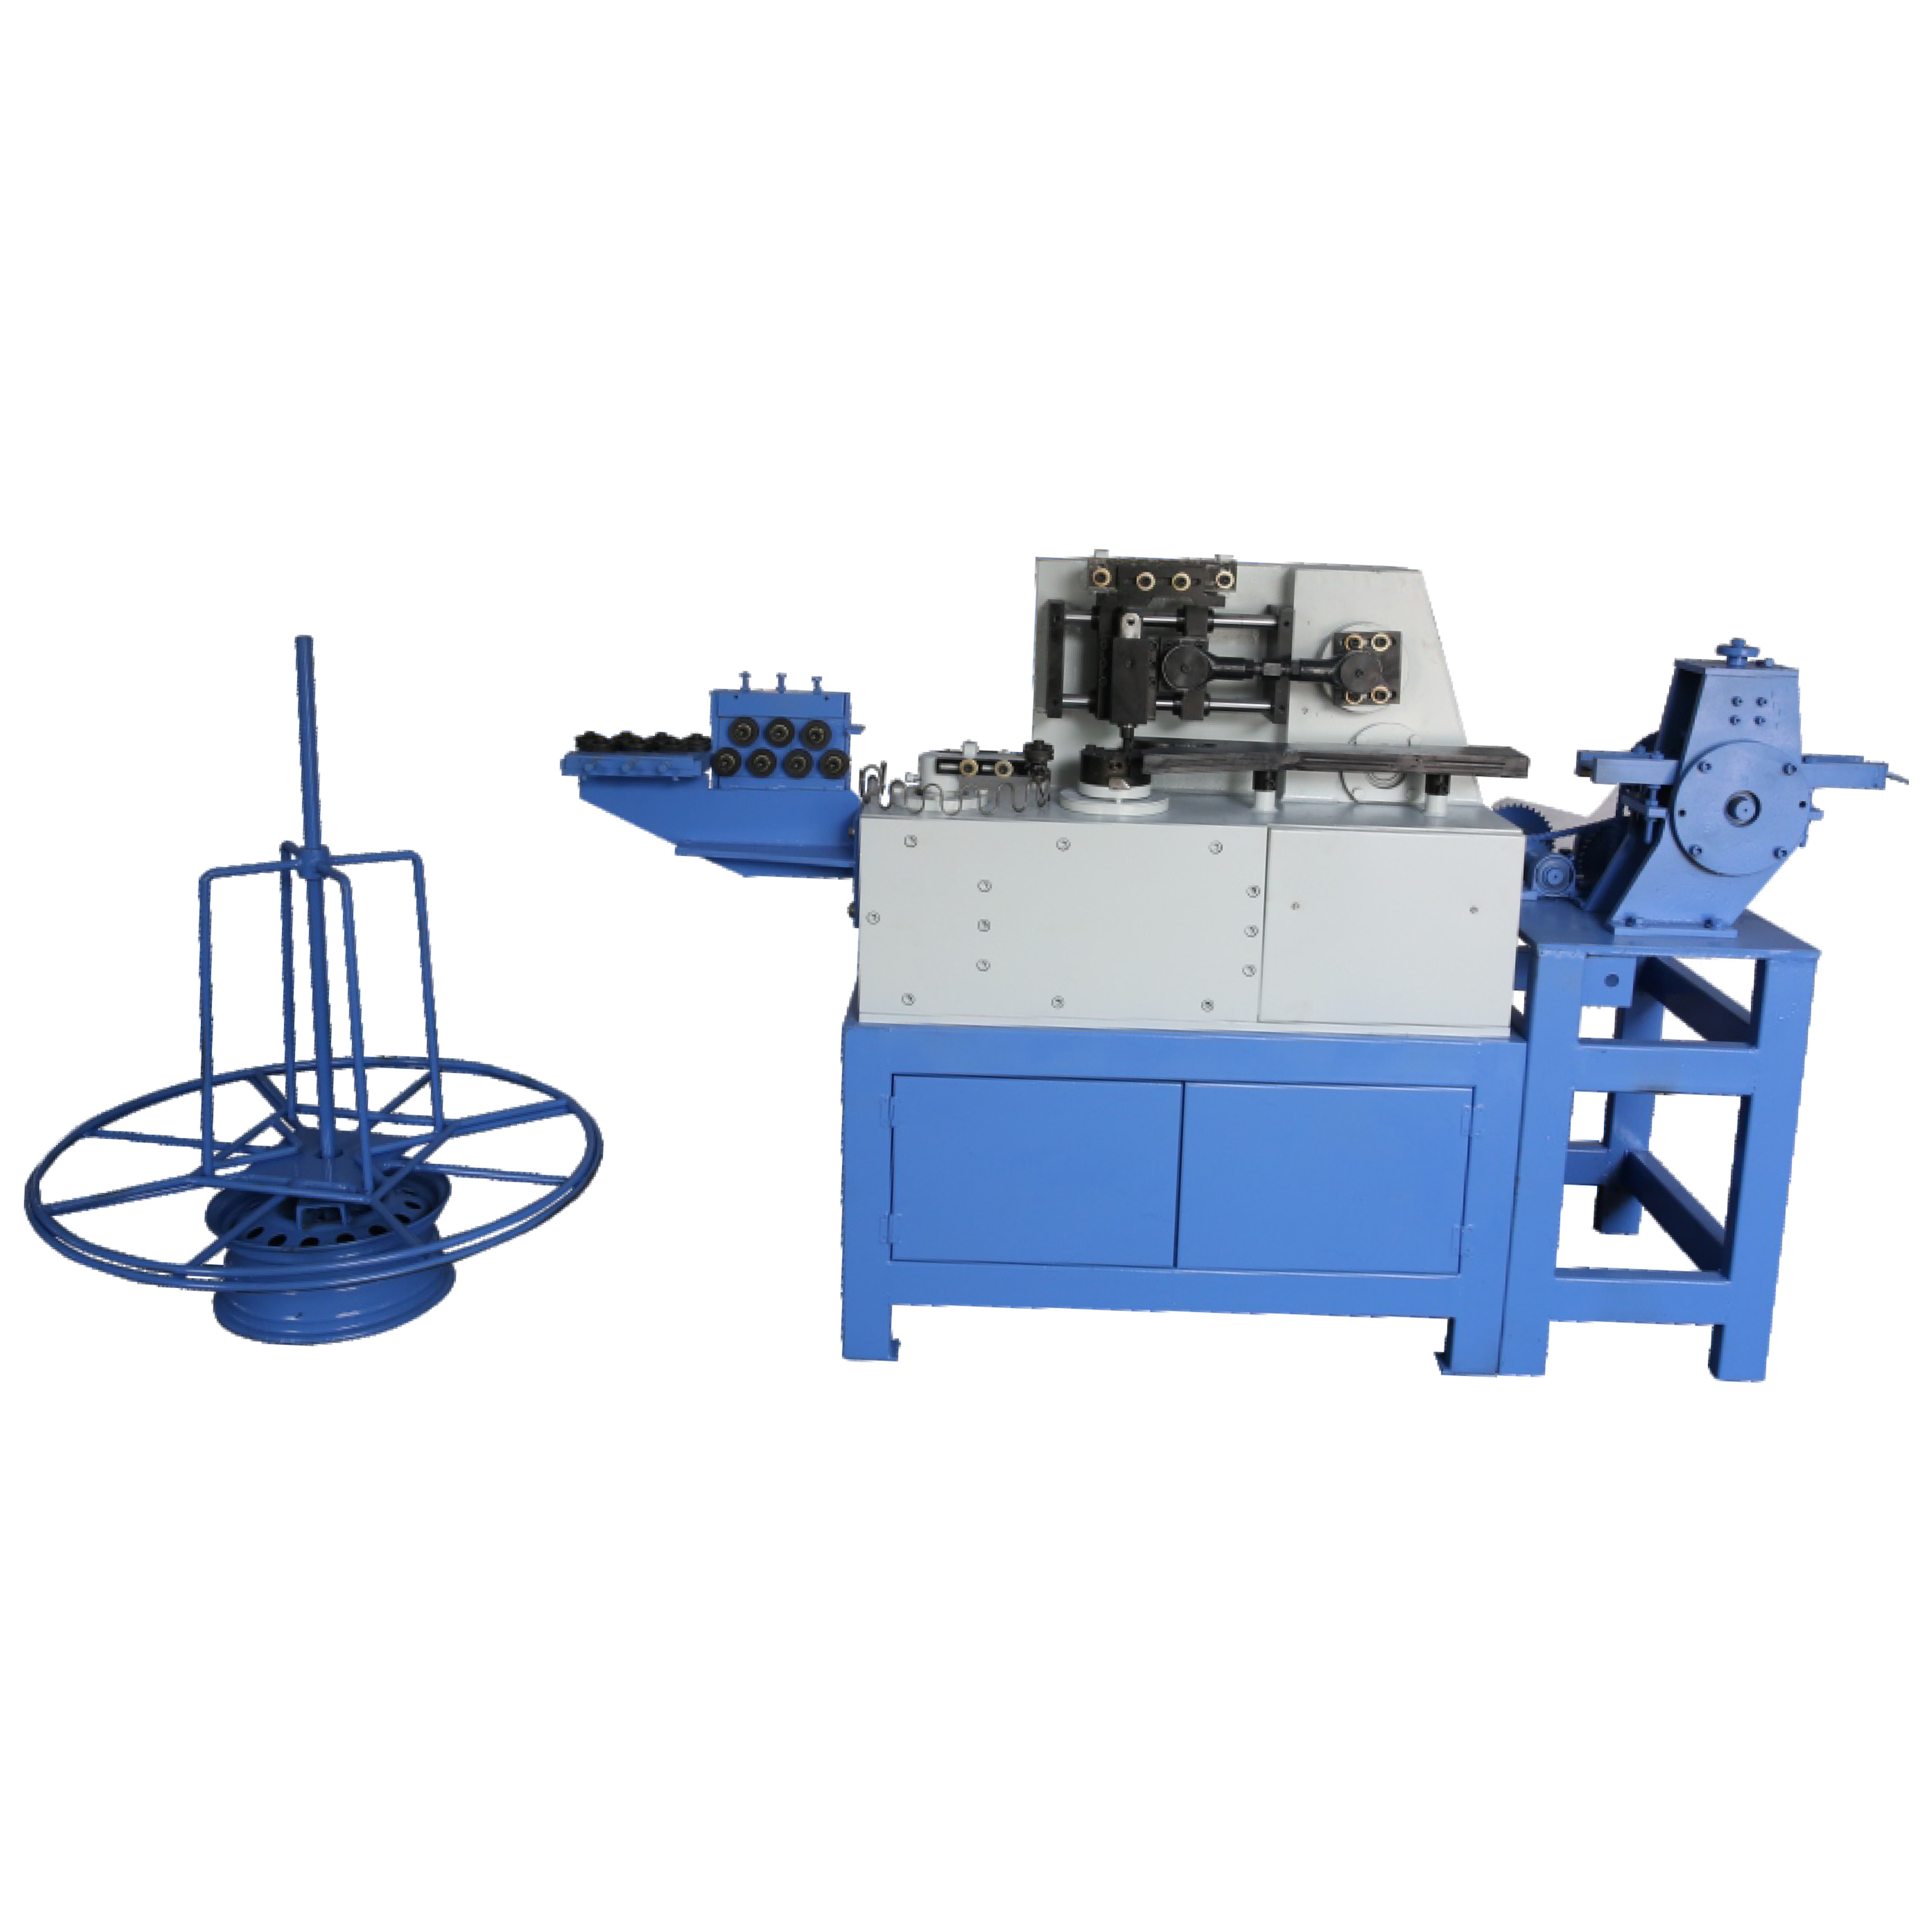 China Manufacturer Sale Automatic S-Shape Spring Forming Machine price advantage Sofa Spring Making Machine on sale